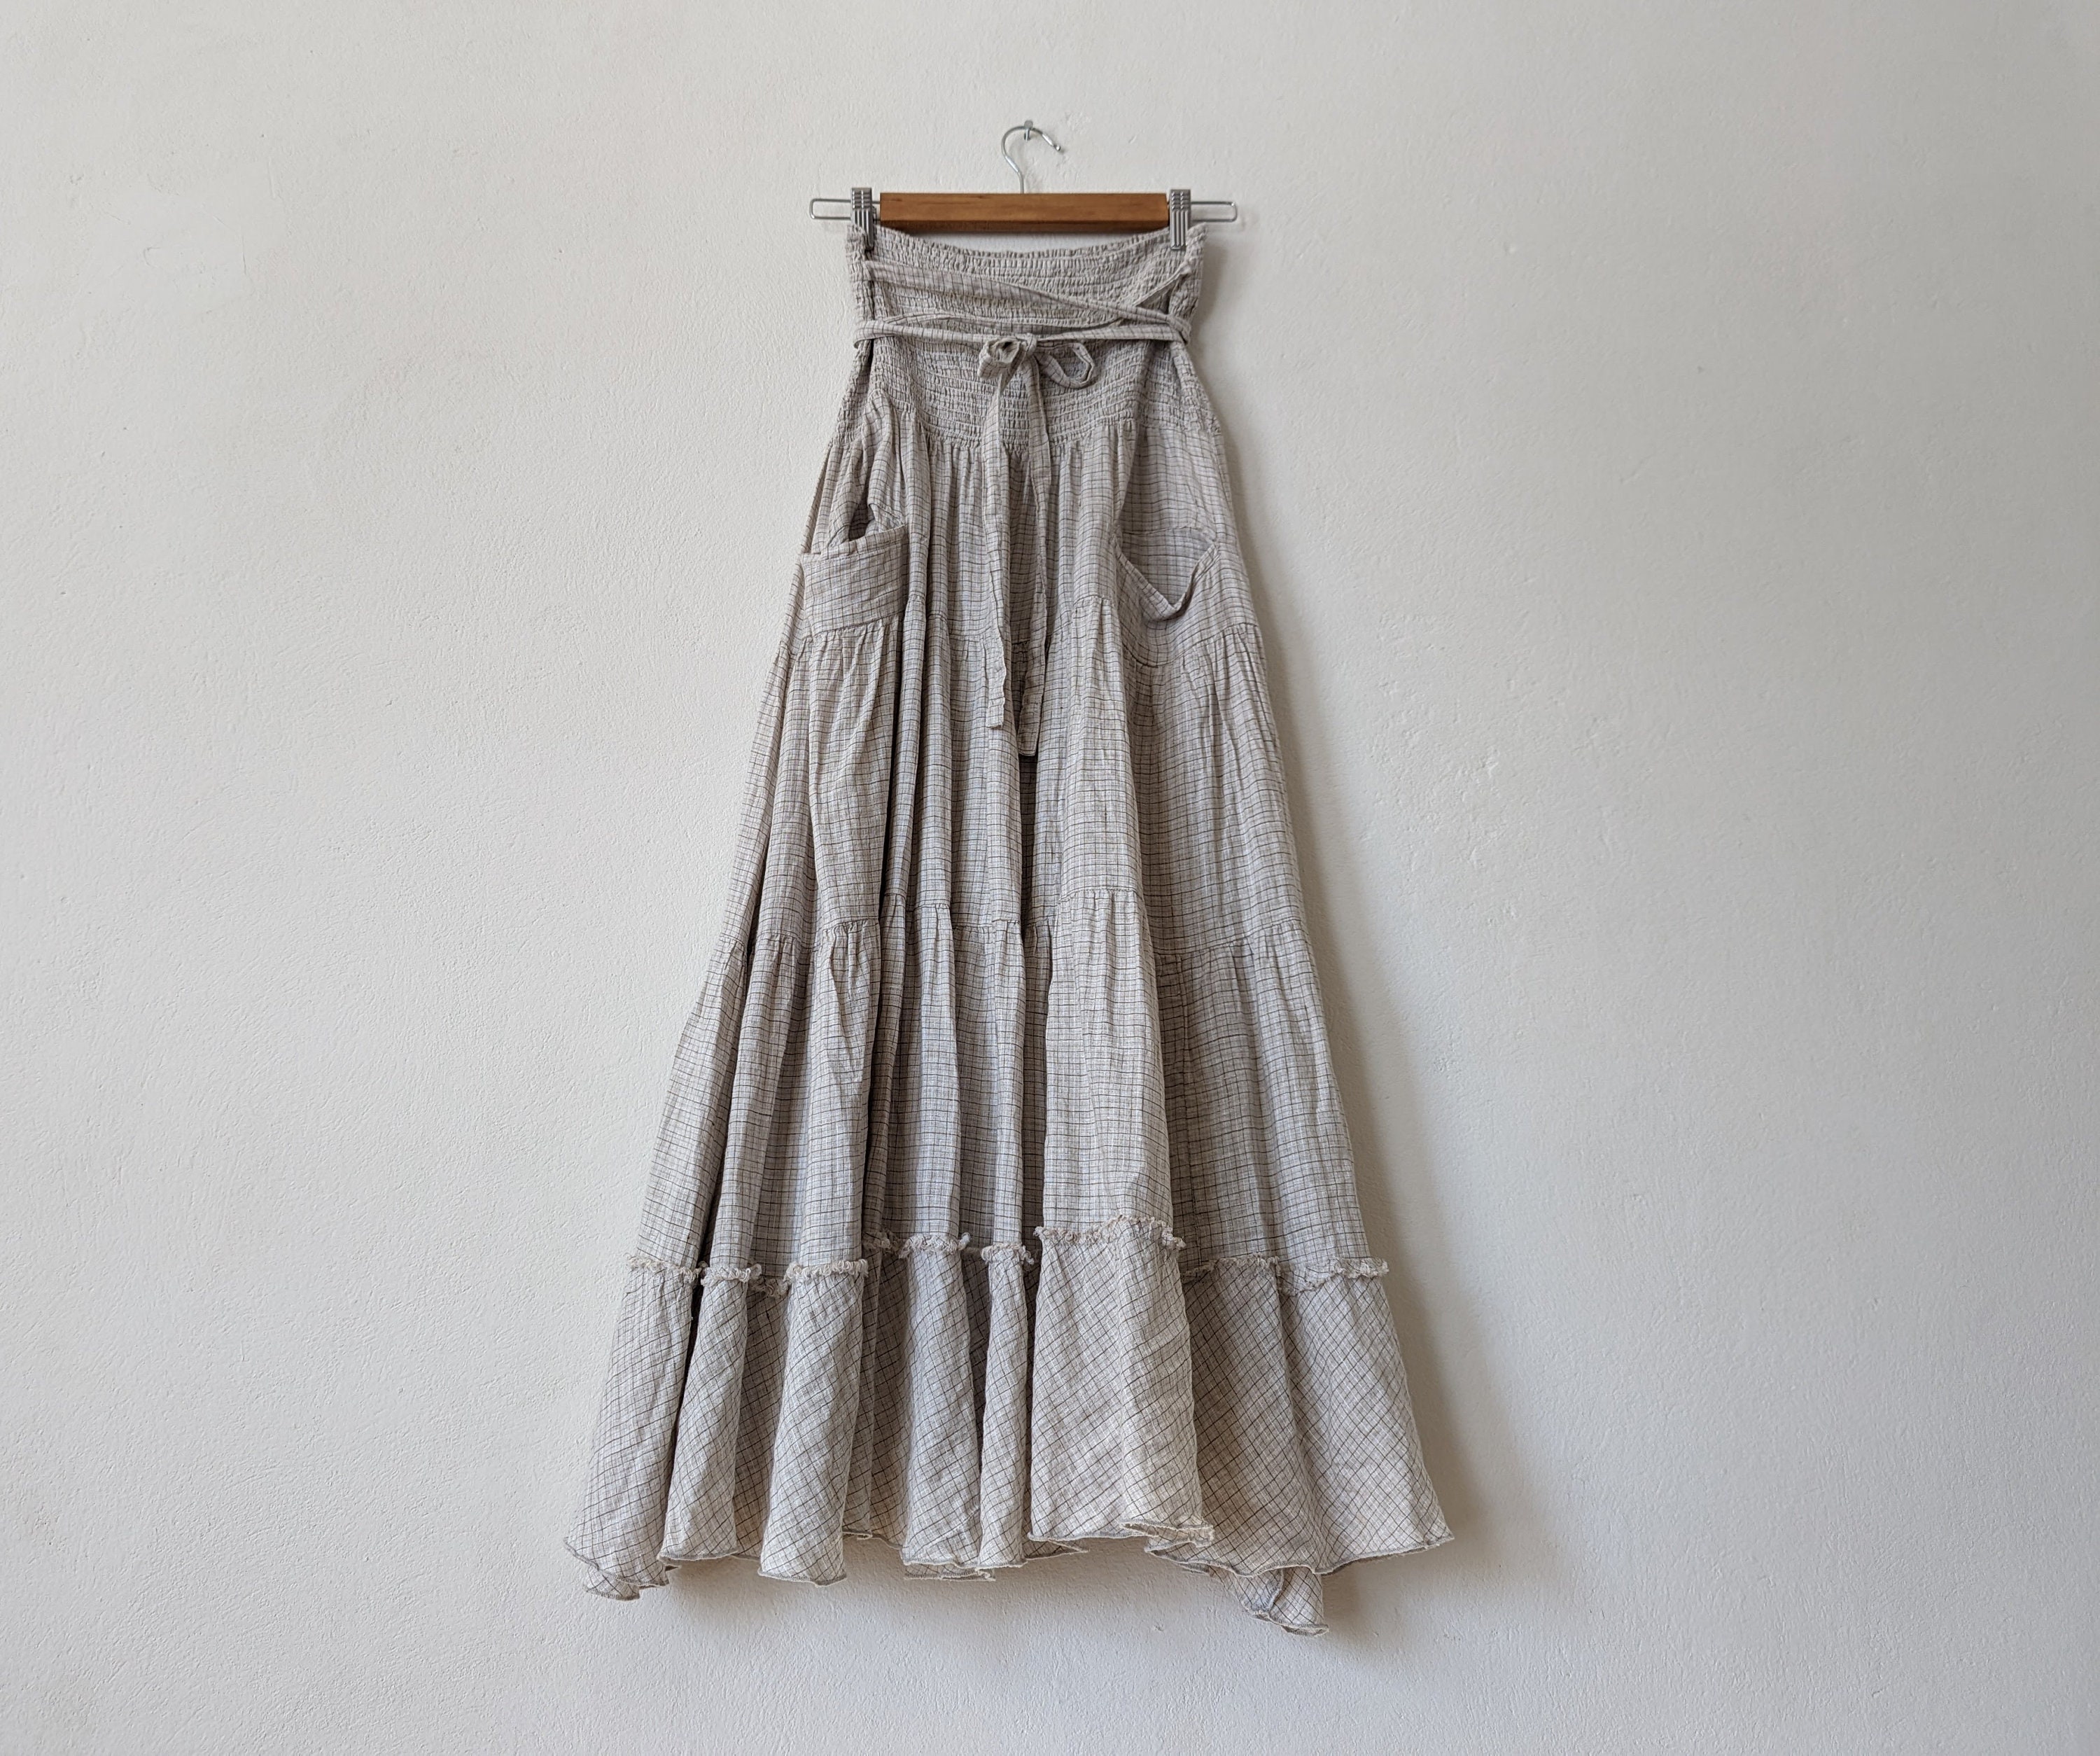 Cotton Gypsy Skirt / 'Tralee' Tiered Petticoat / 4 Earth Tone Colors /  Breathe Clothing USA